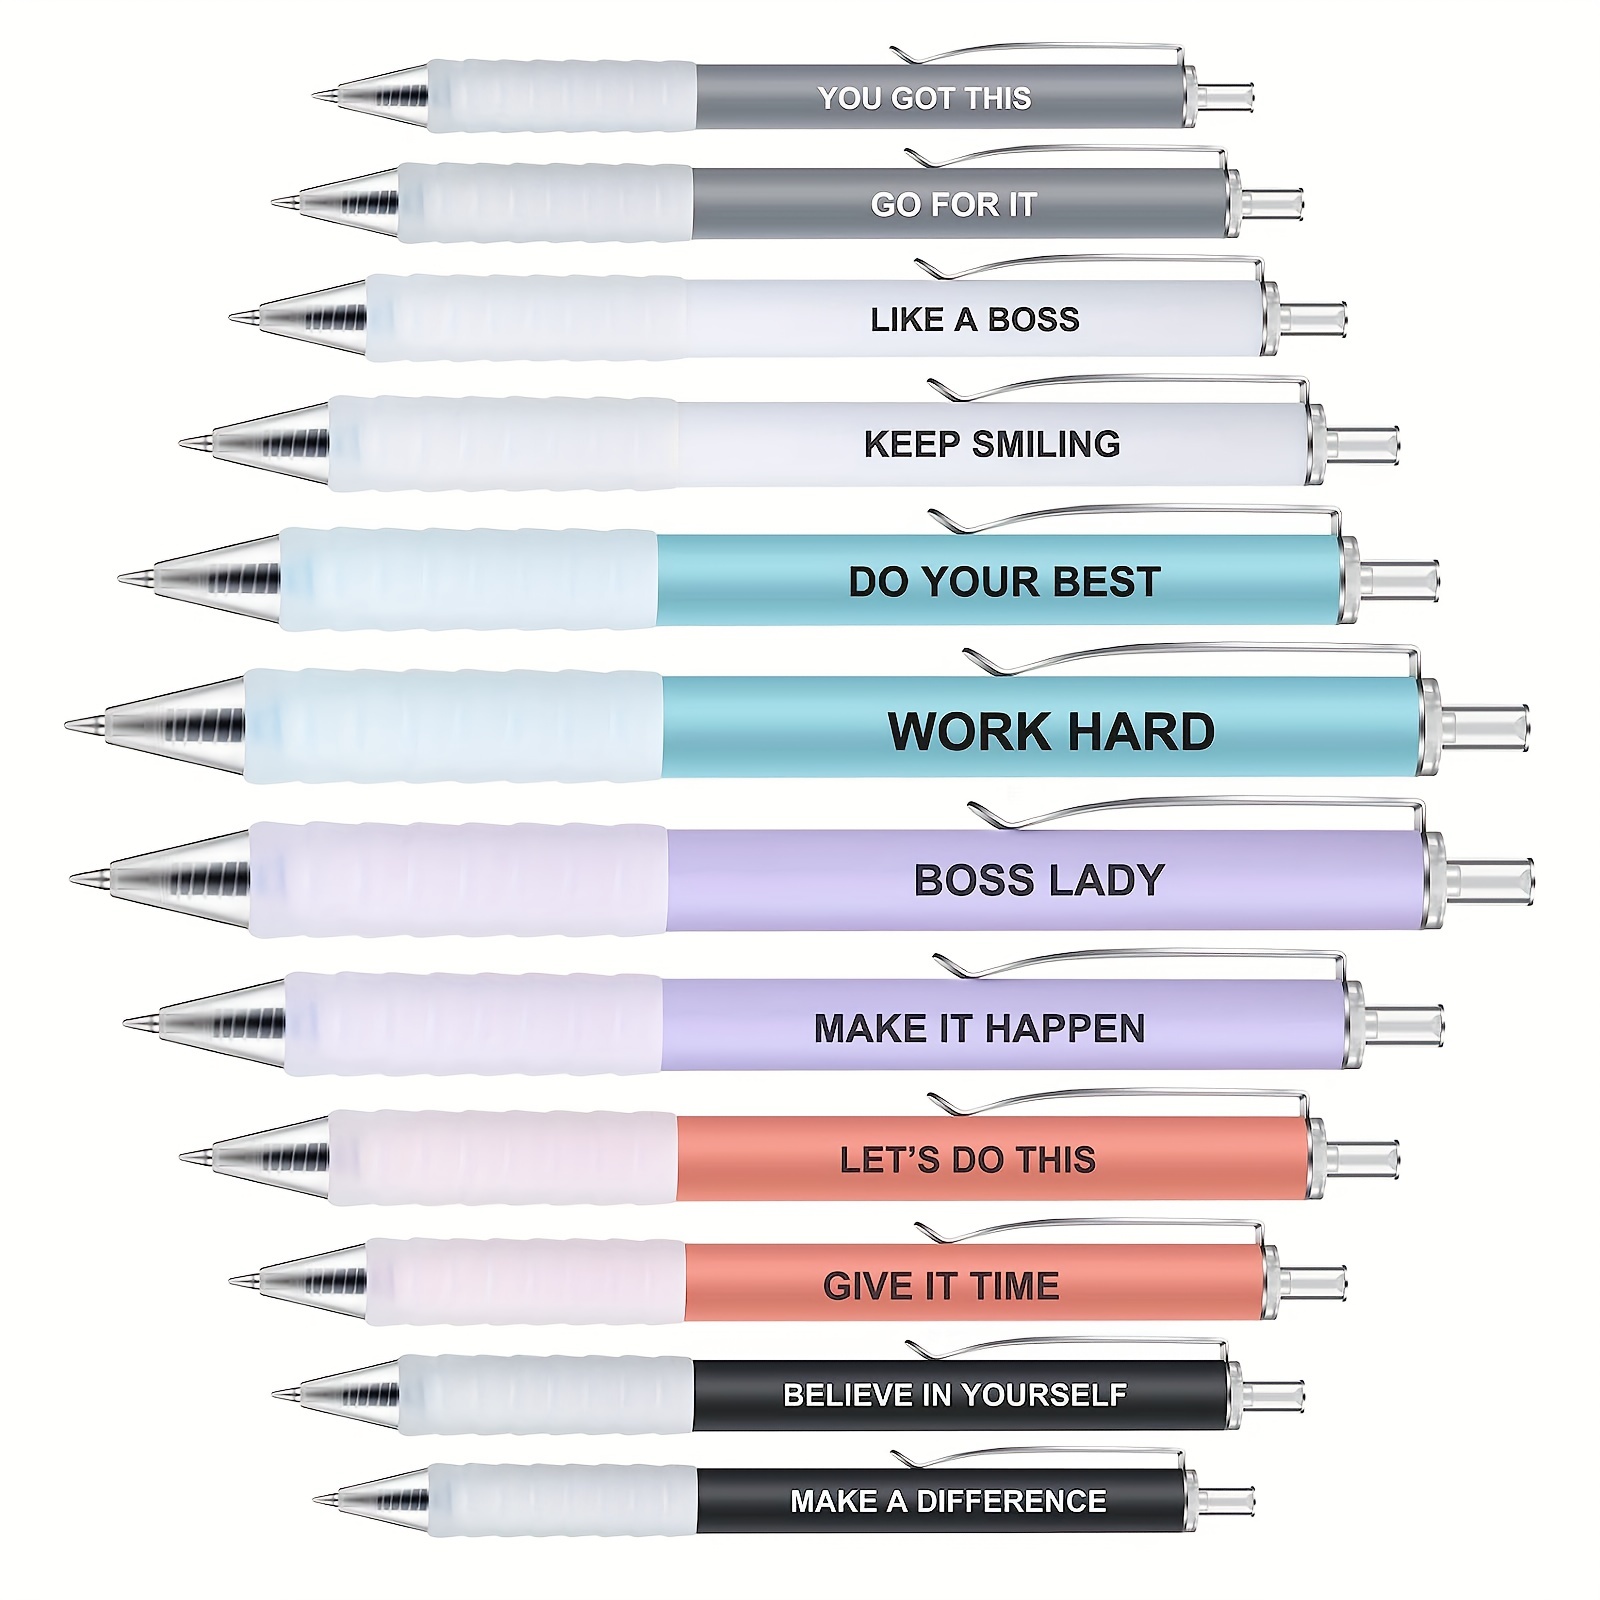  AUAUY Ballpoint Pens, 12 PCS Ballpoint Pens Funny Pen,  Inspirational Retractable Ballpoint Pens with Motivational Messages, 1 mm  Black Ink Ballpoint Pens for Colleagues Teachers Adults Students : Office  Products